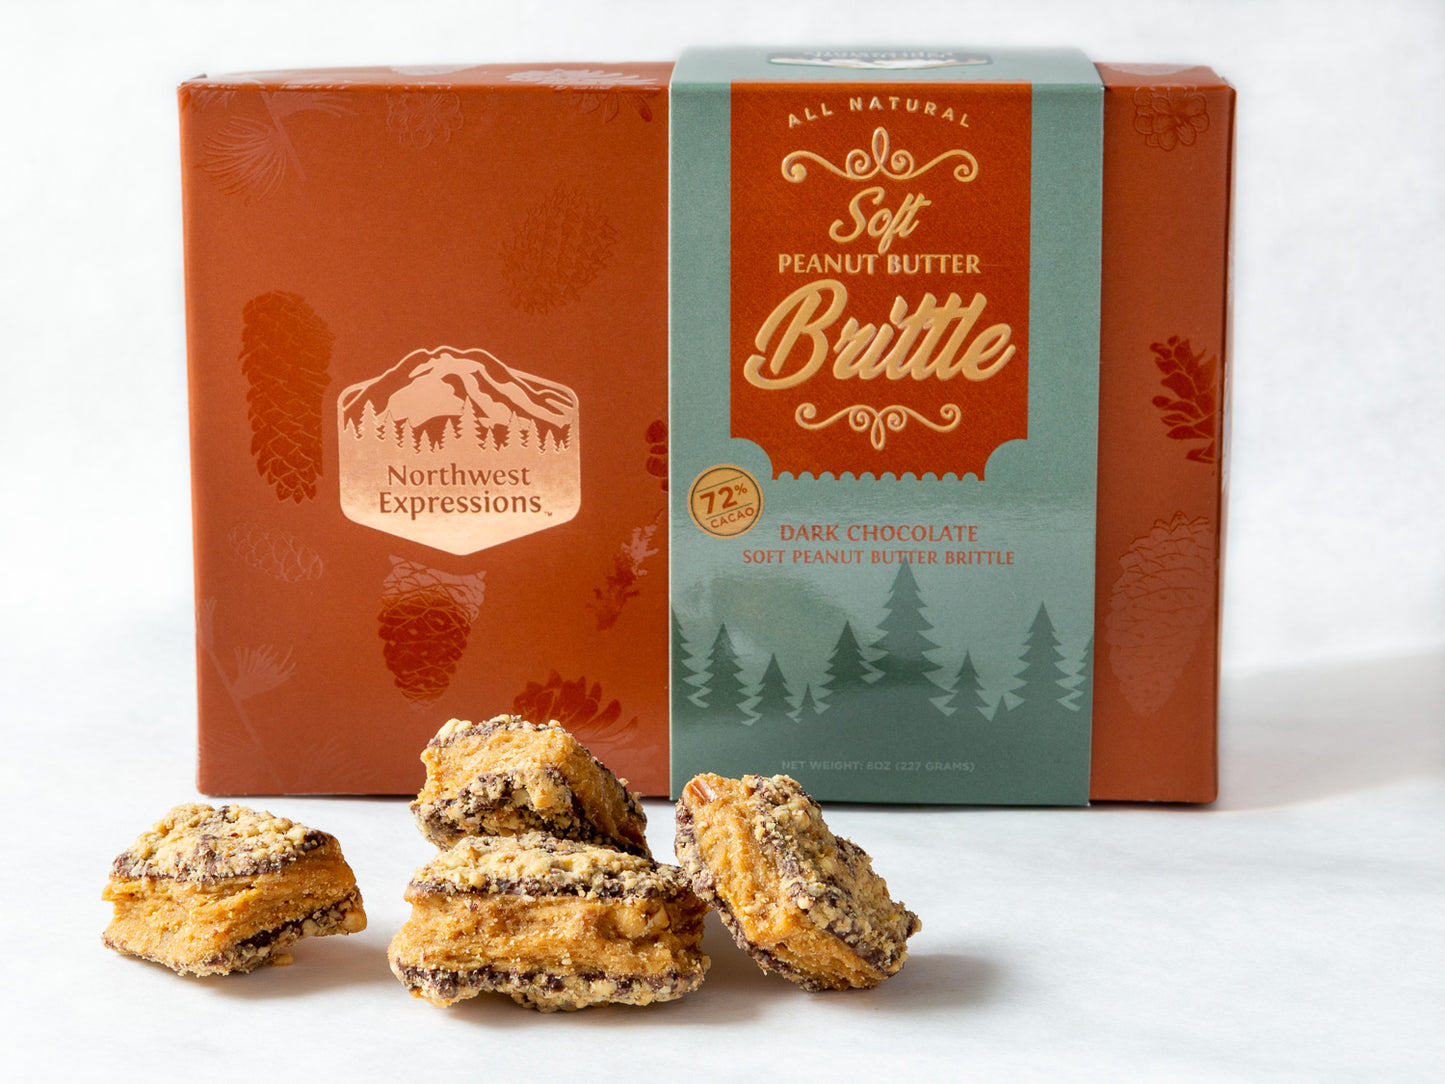 an 8 ounce gift box of soft peanut butter brittle dipped in dark chocolate